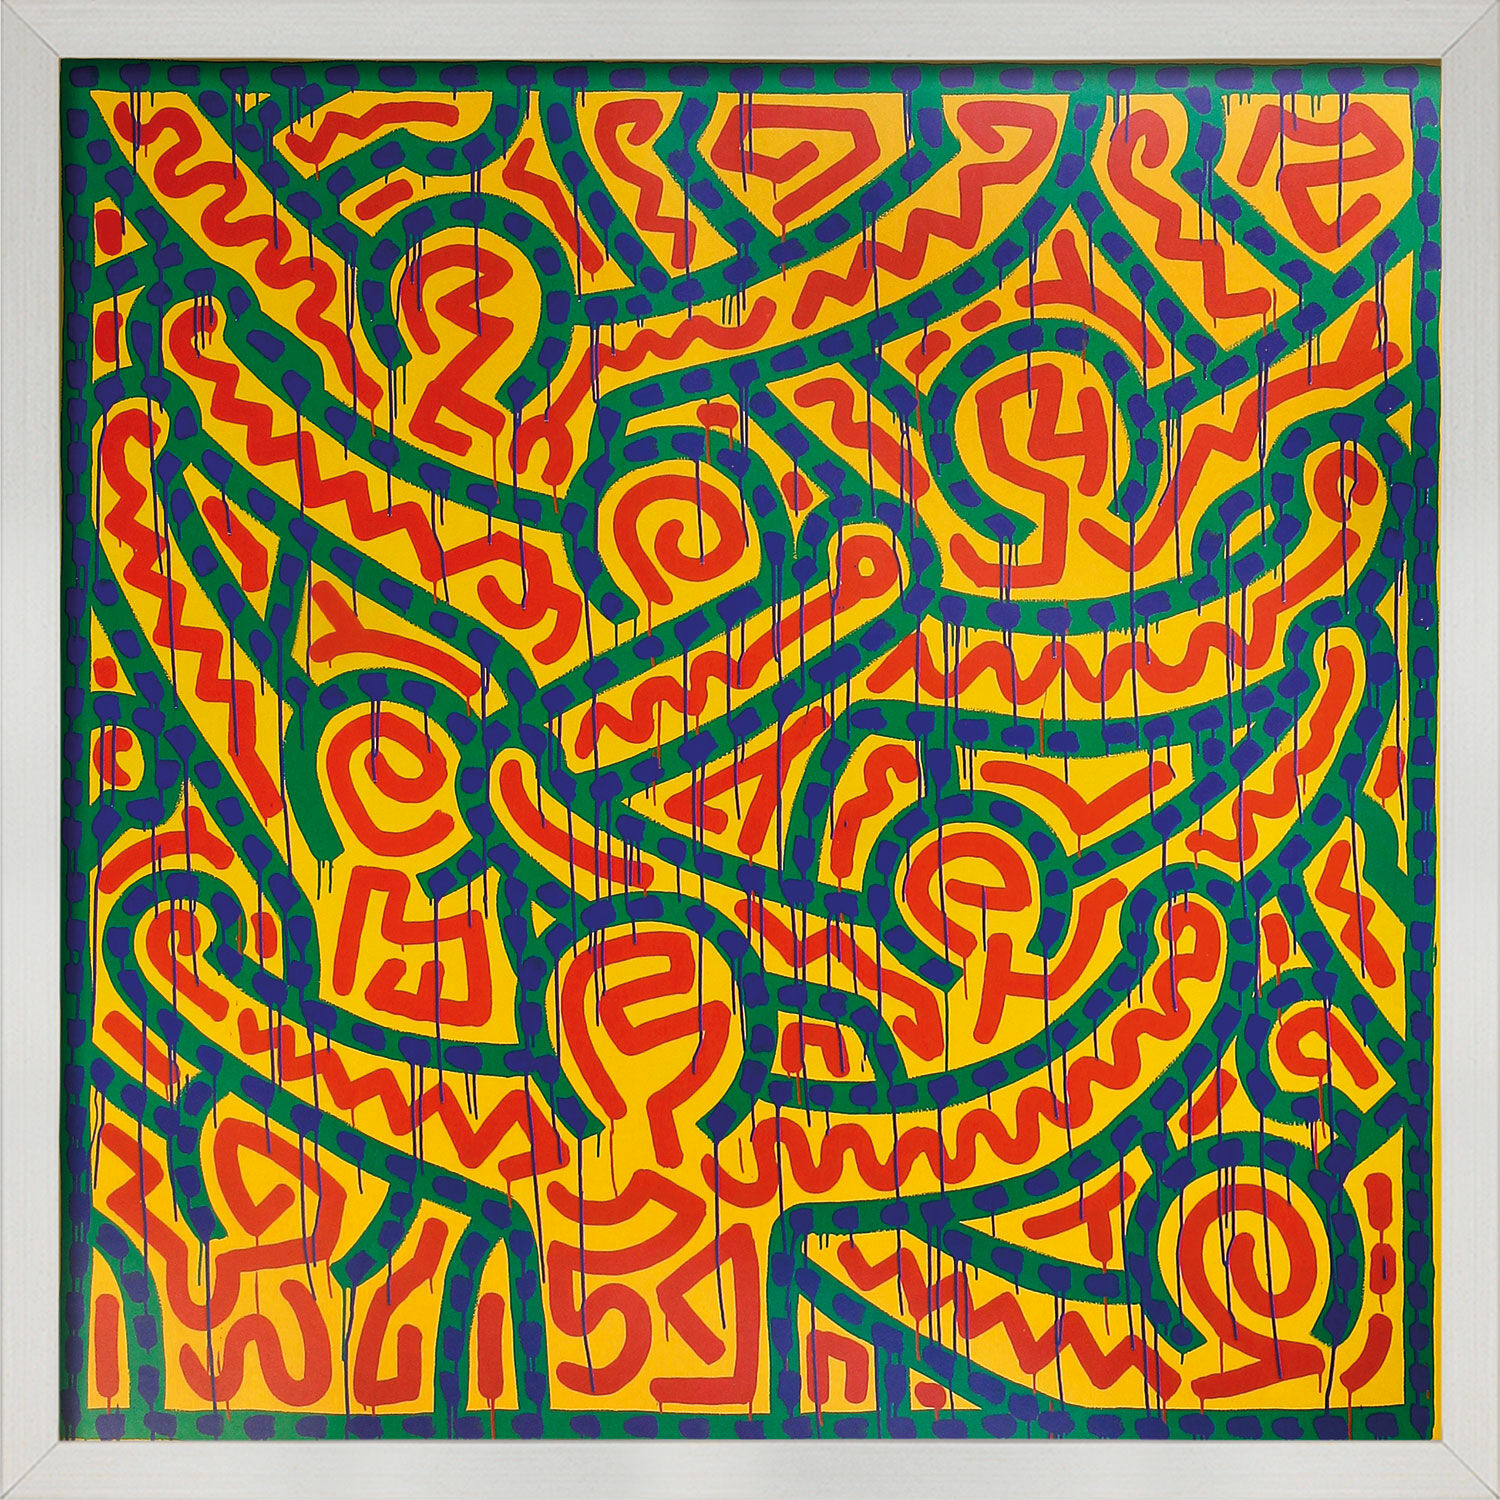 Picture "Untitled 1989", framed by Keith Haring